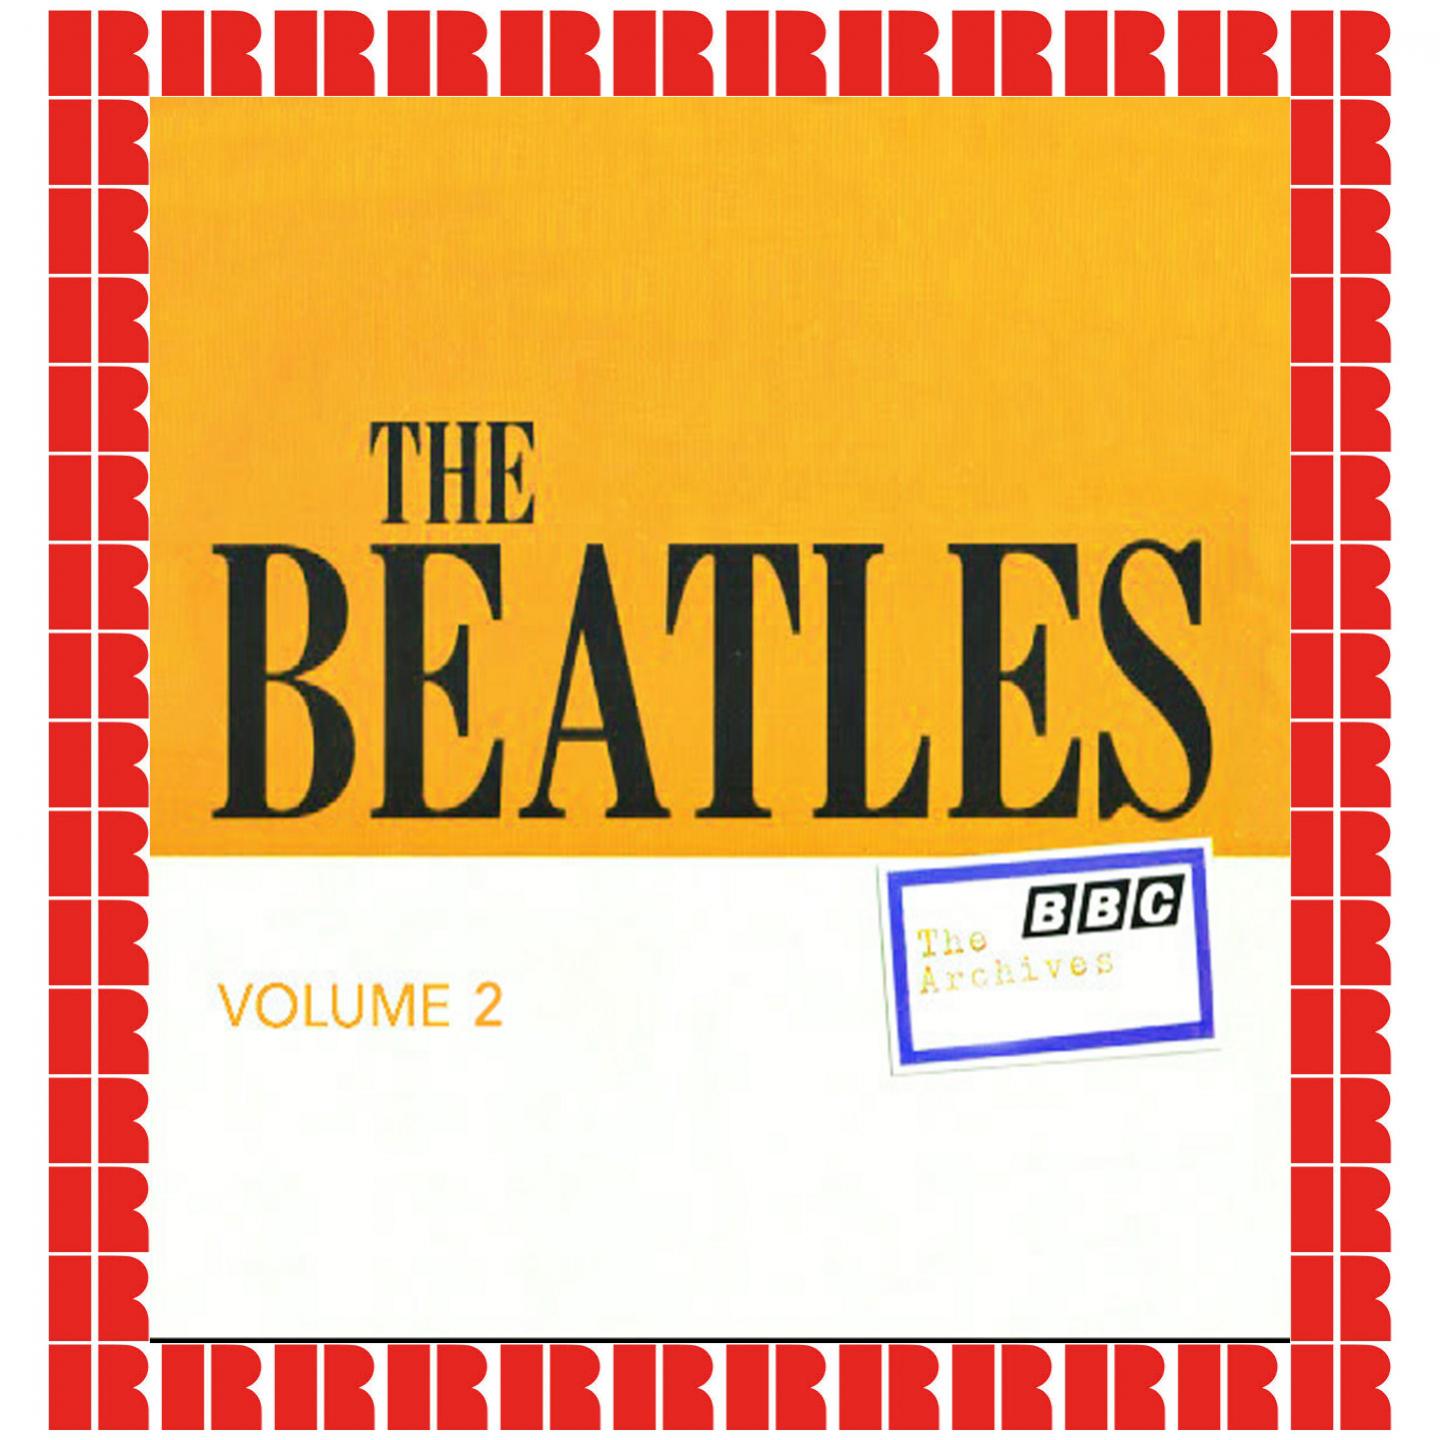 Pop Go The Beatles - May 24, 1963 (Pop Go To The Beatles #1)